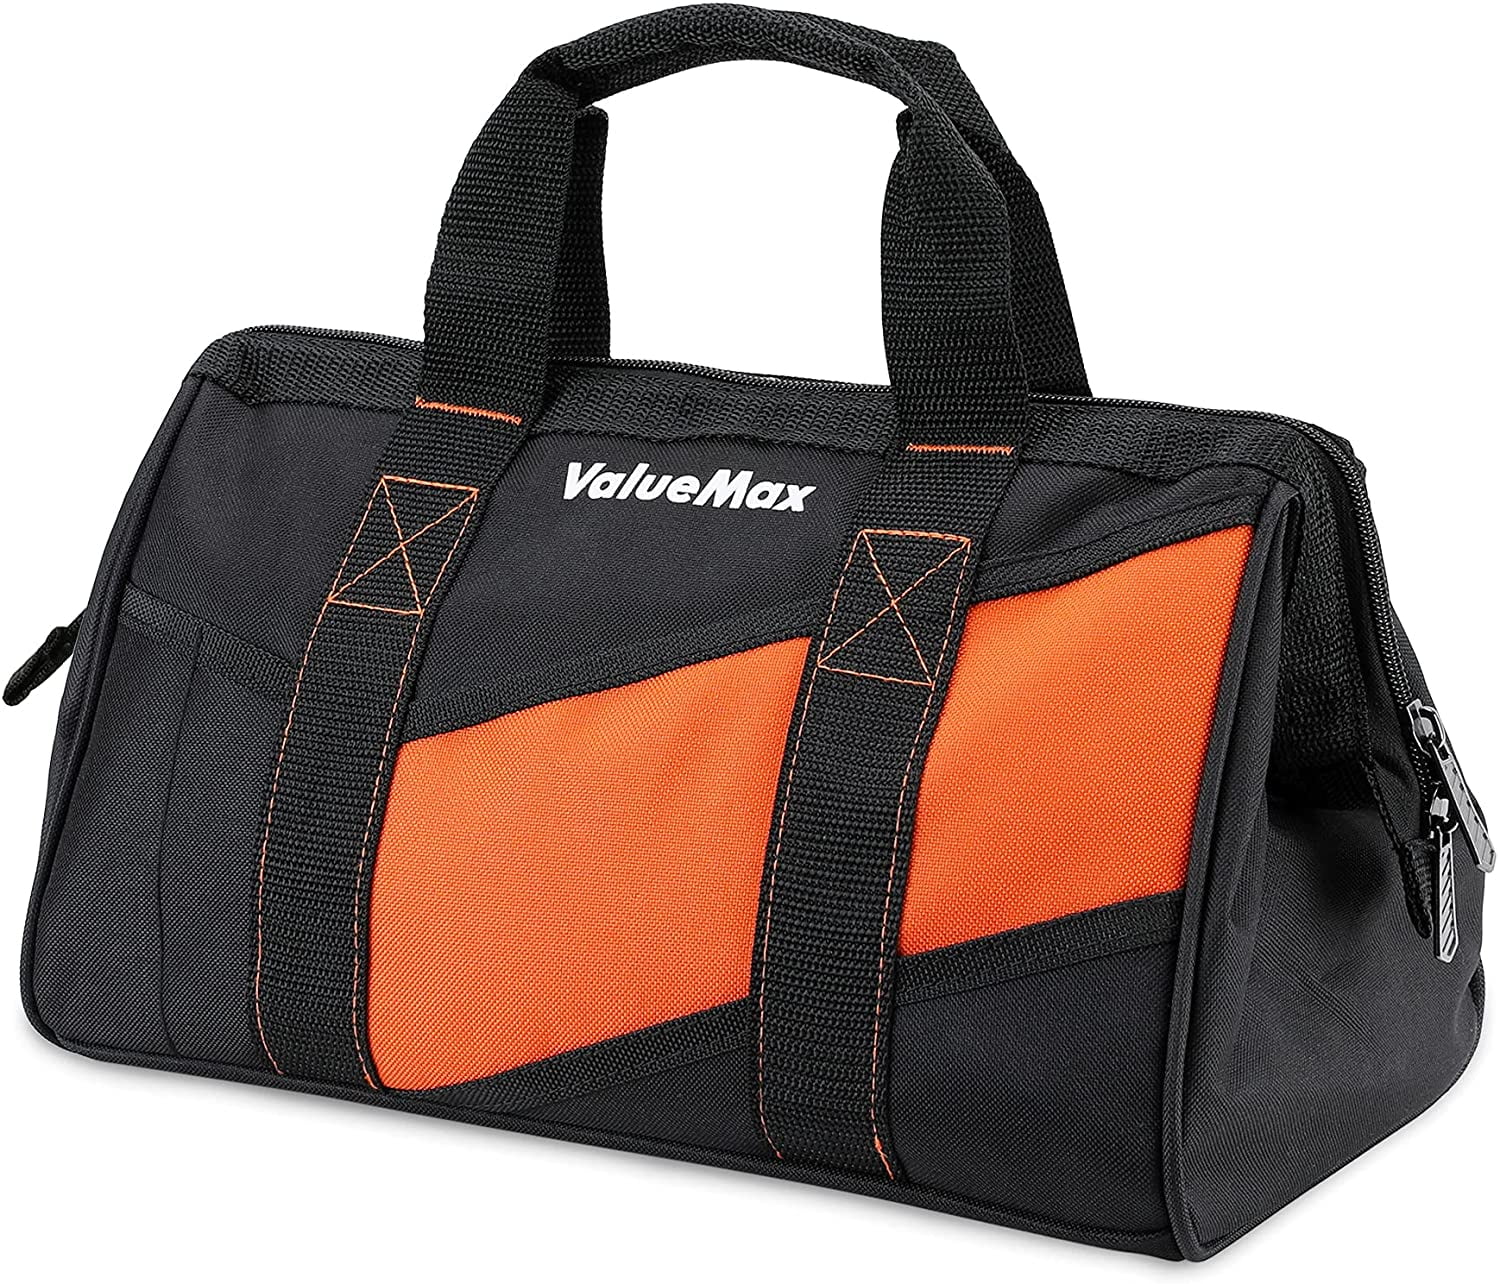 ValueMax 16-Inch Wide Mouth Tool Bag, Tool Organizer Tote Bag with Shoulder  Strap, Heavy-duty Tool Storage Bag